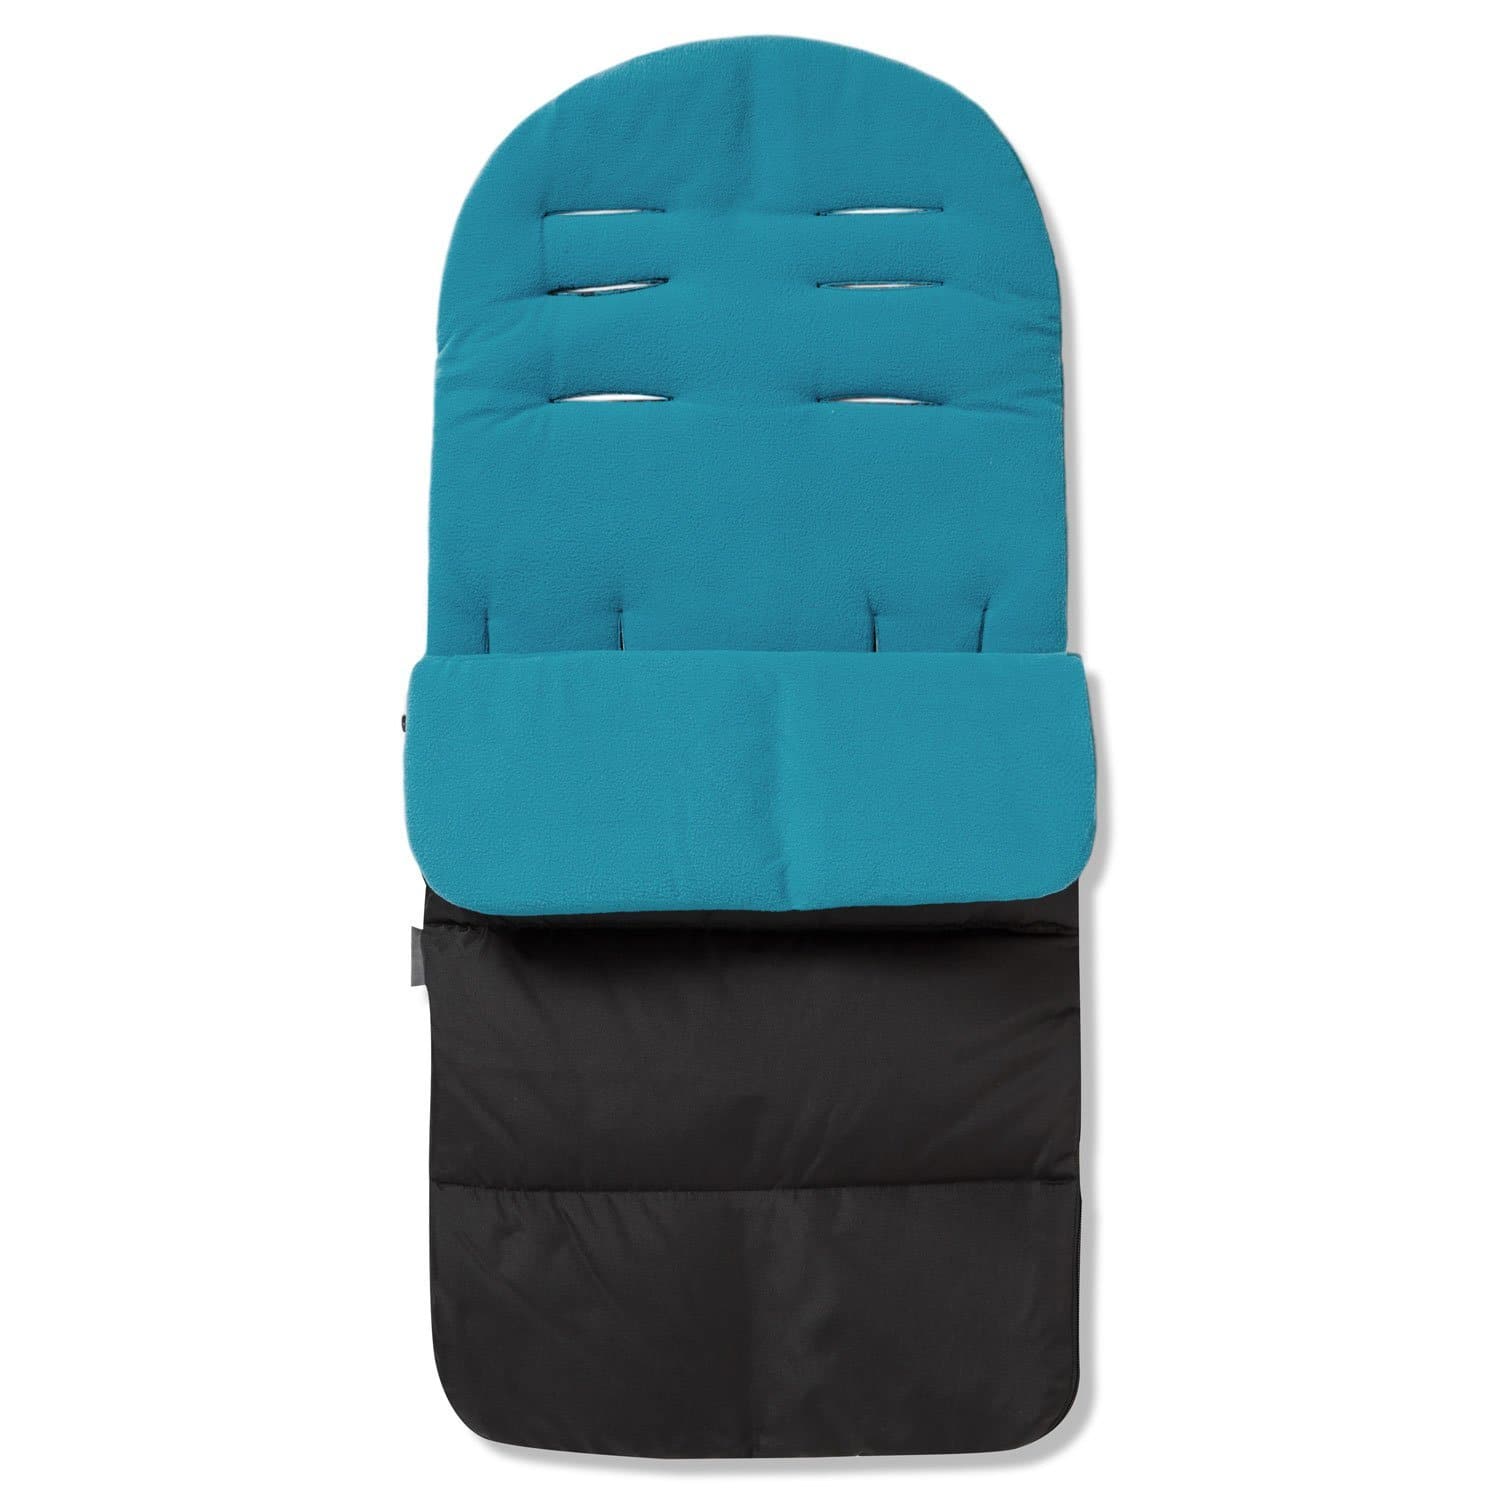 Premium Footmuff / Cosy Toes Compatible with Quax - Ocean Blue / Fits All Models | For Your Little One